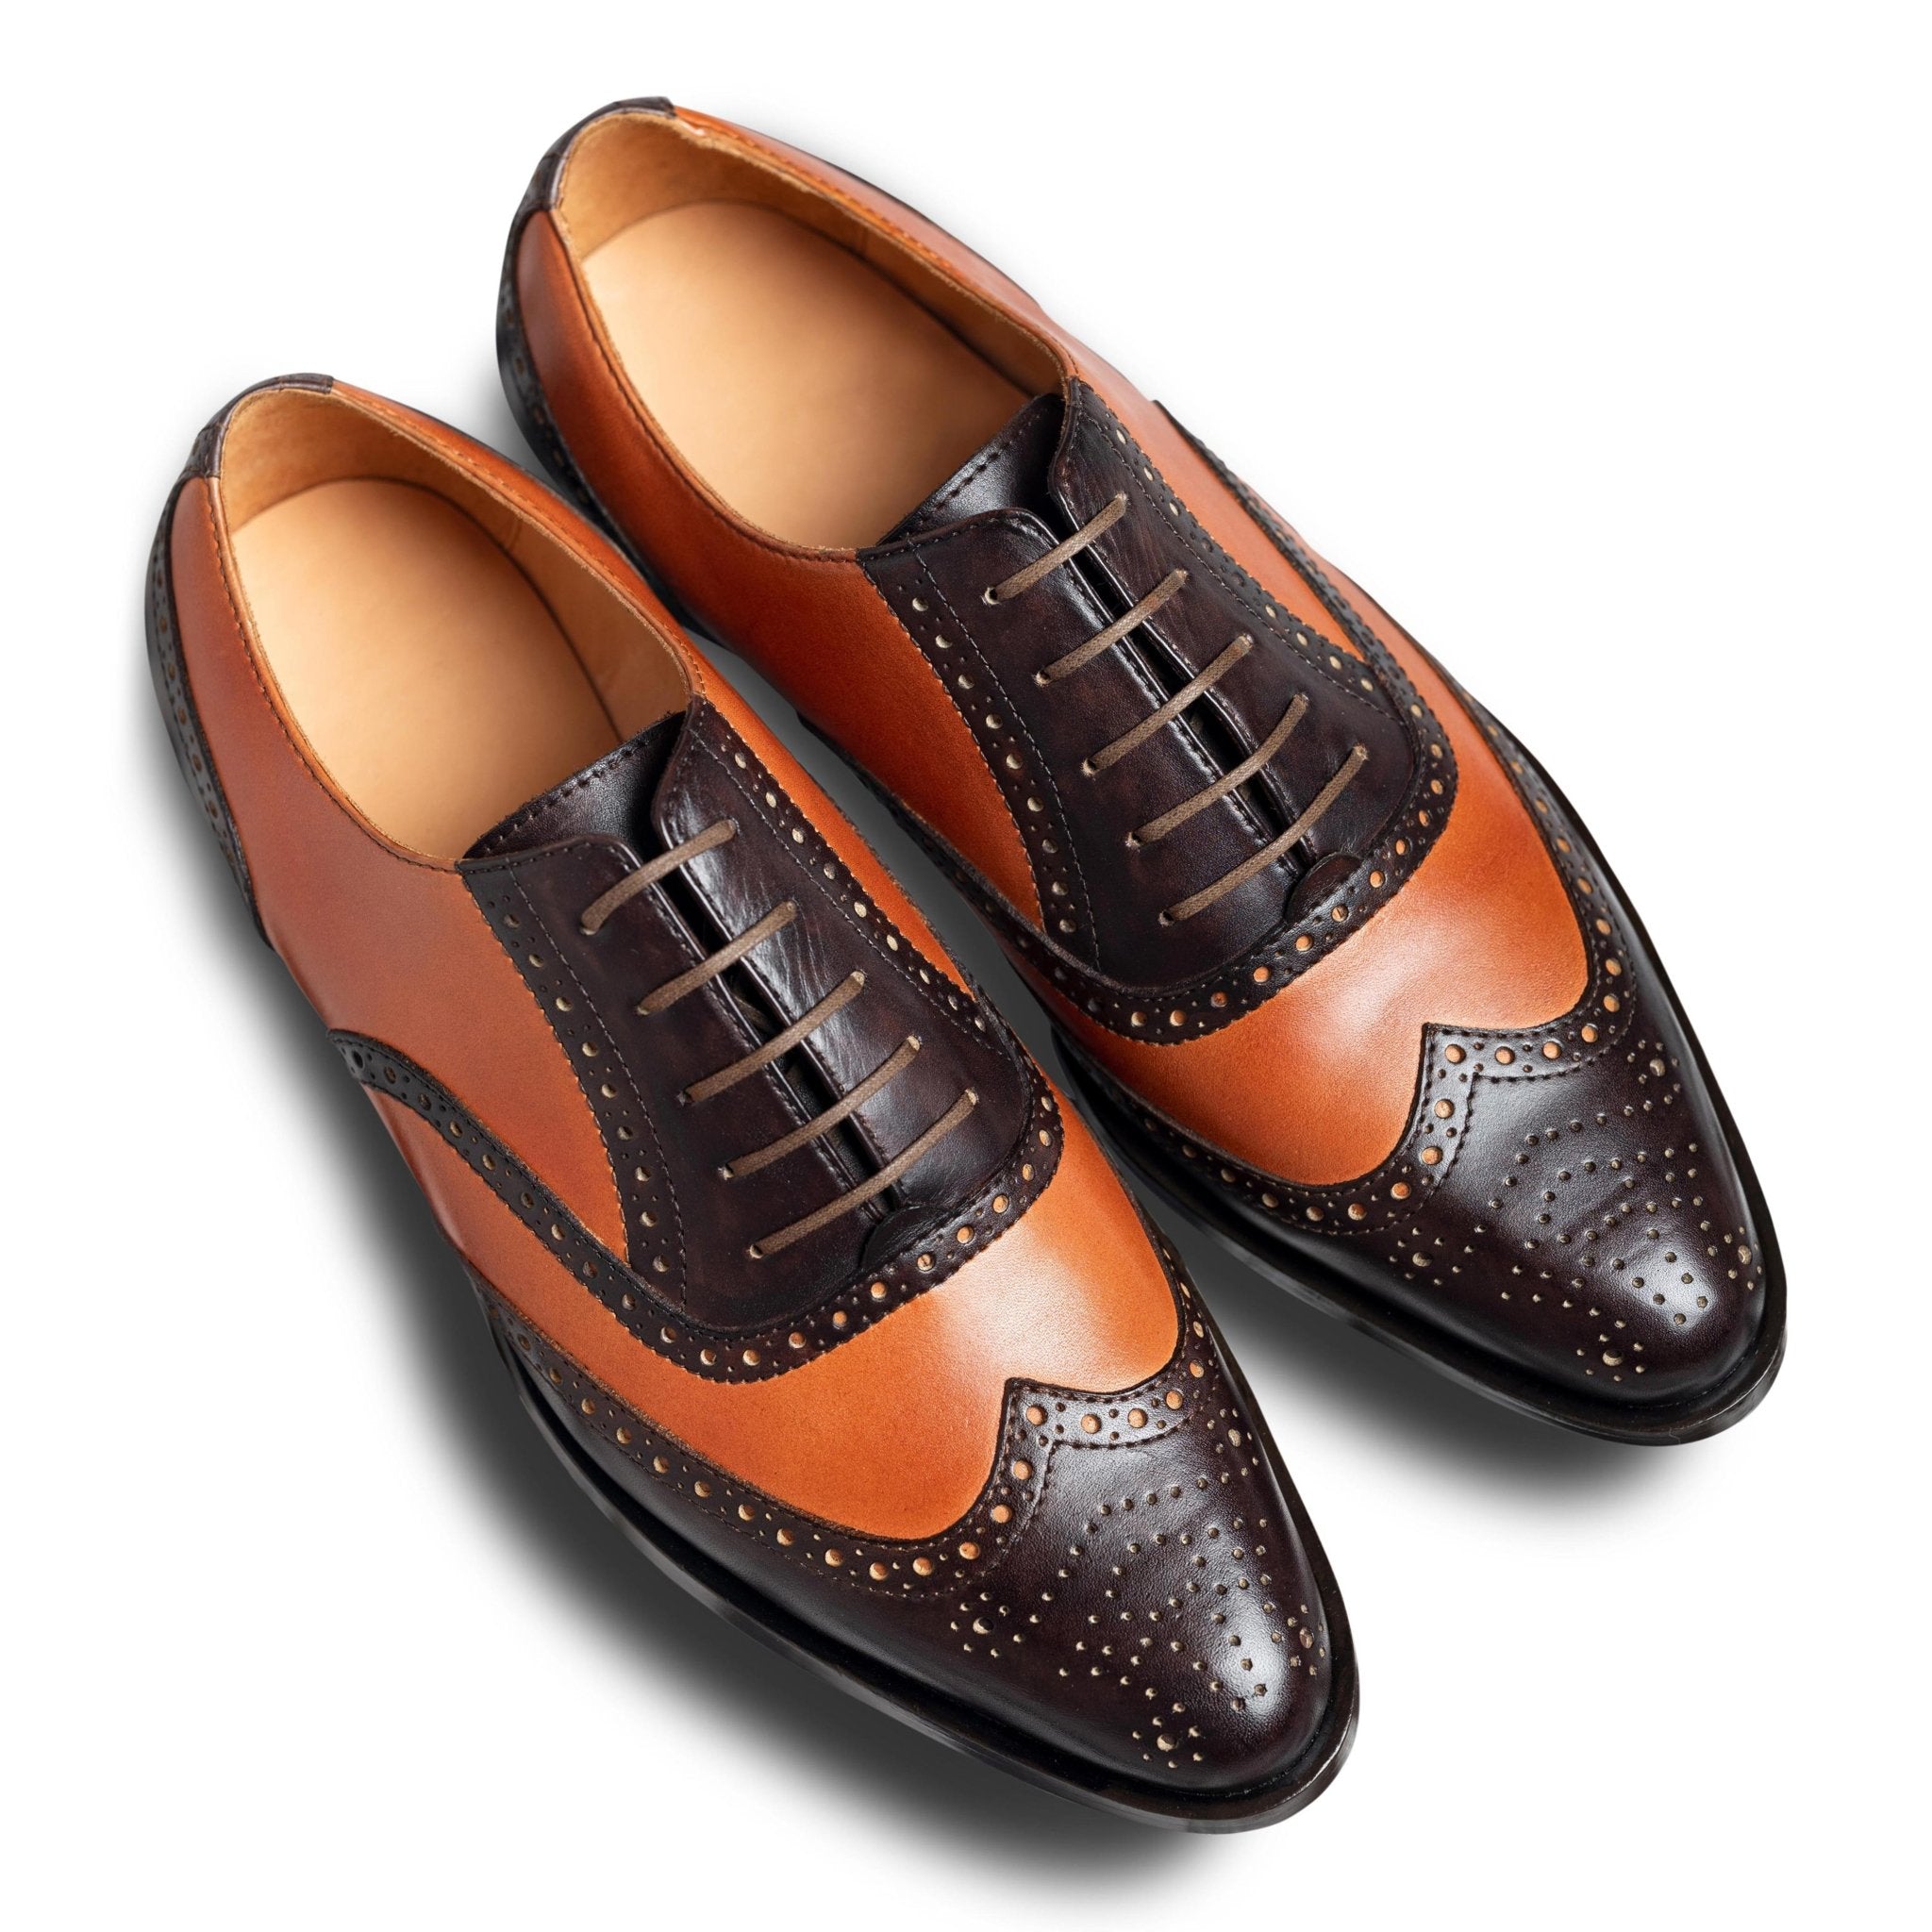 Chocolatto | Dark Brown Leather Oxford Brogues Shoes for Men | dmodot